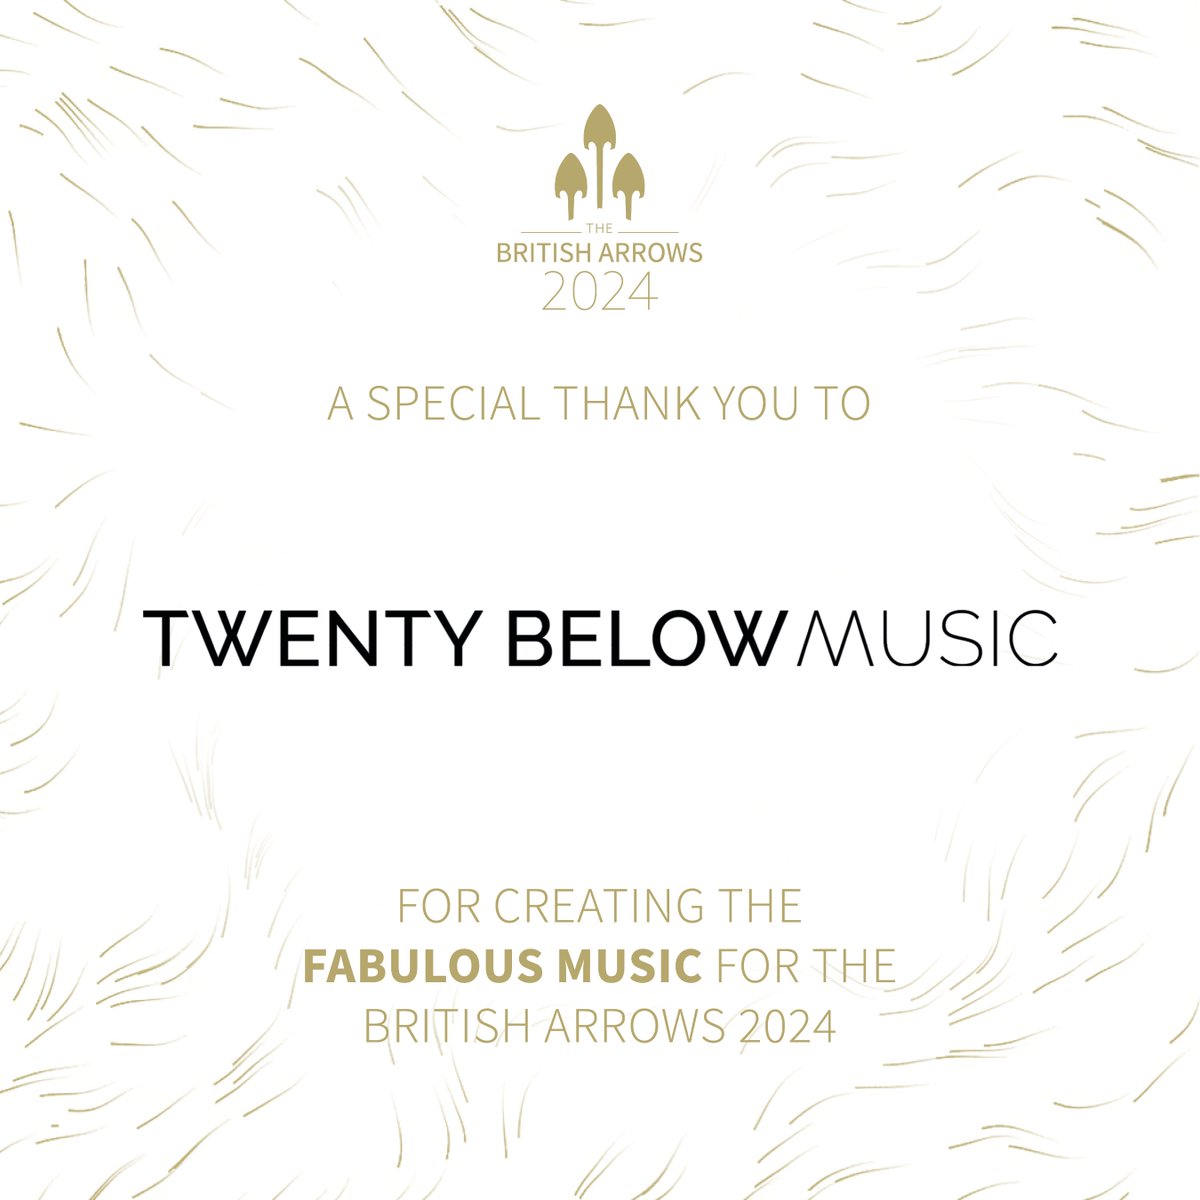 A special thank you to Twenty Below Music For creating the fabulous music! #BA23 #BA23 #BritishArrows #advertising #award #celebration